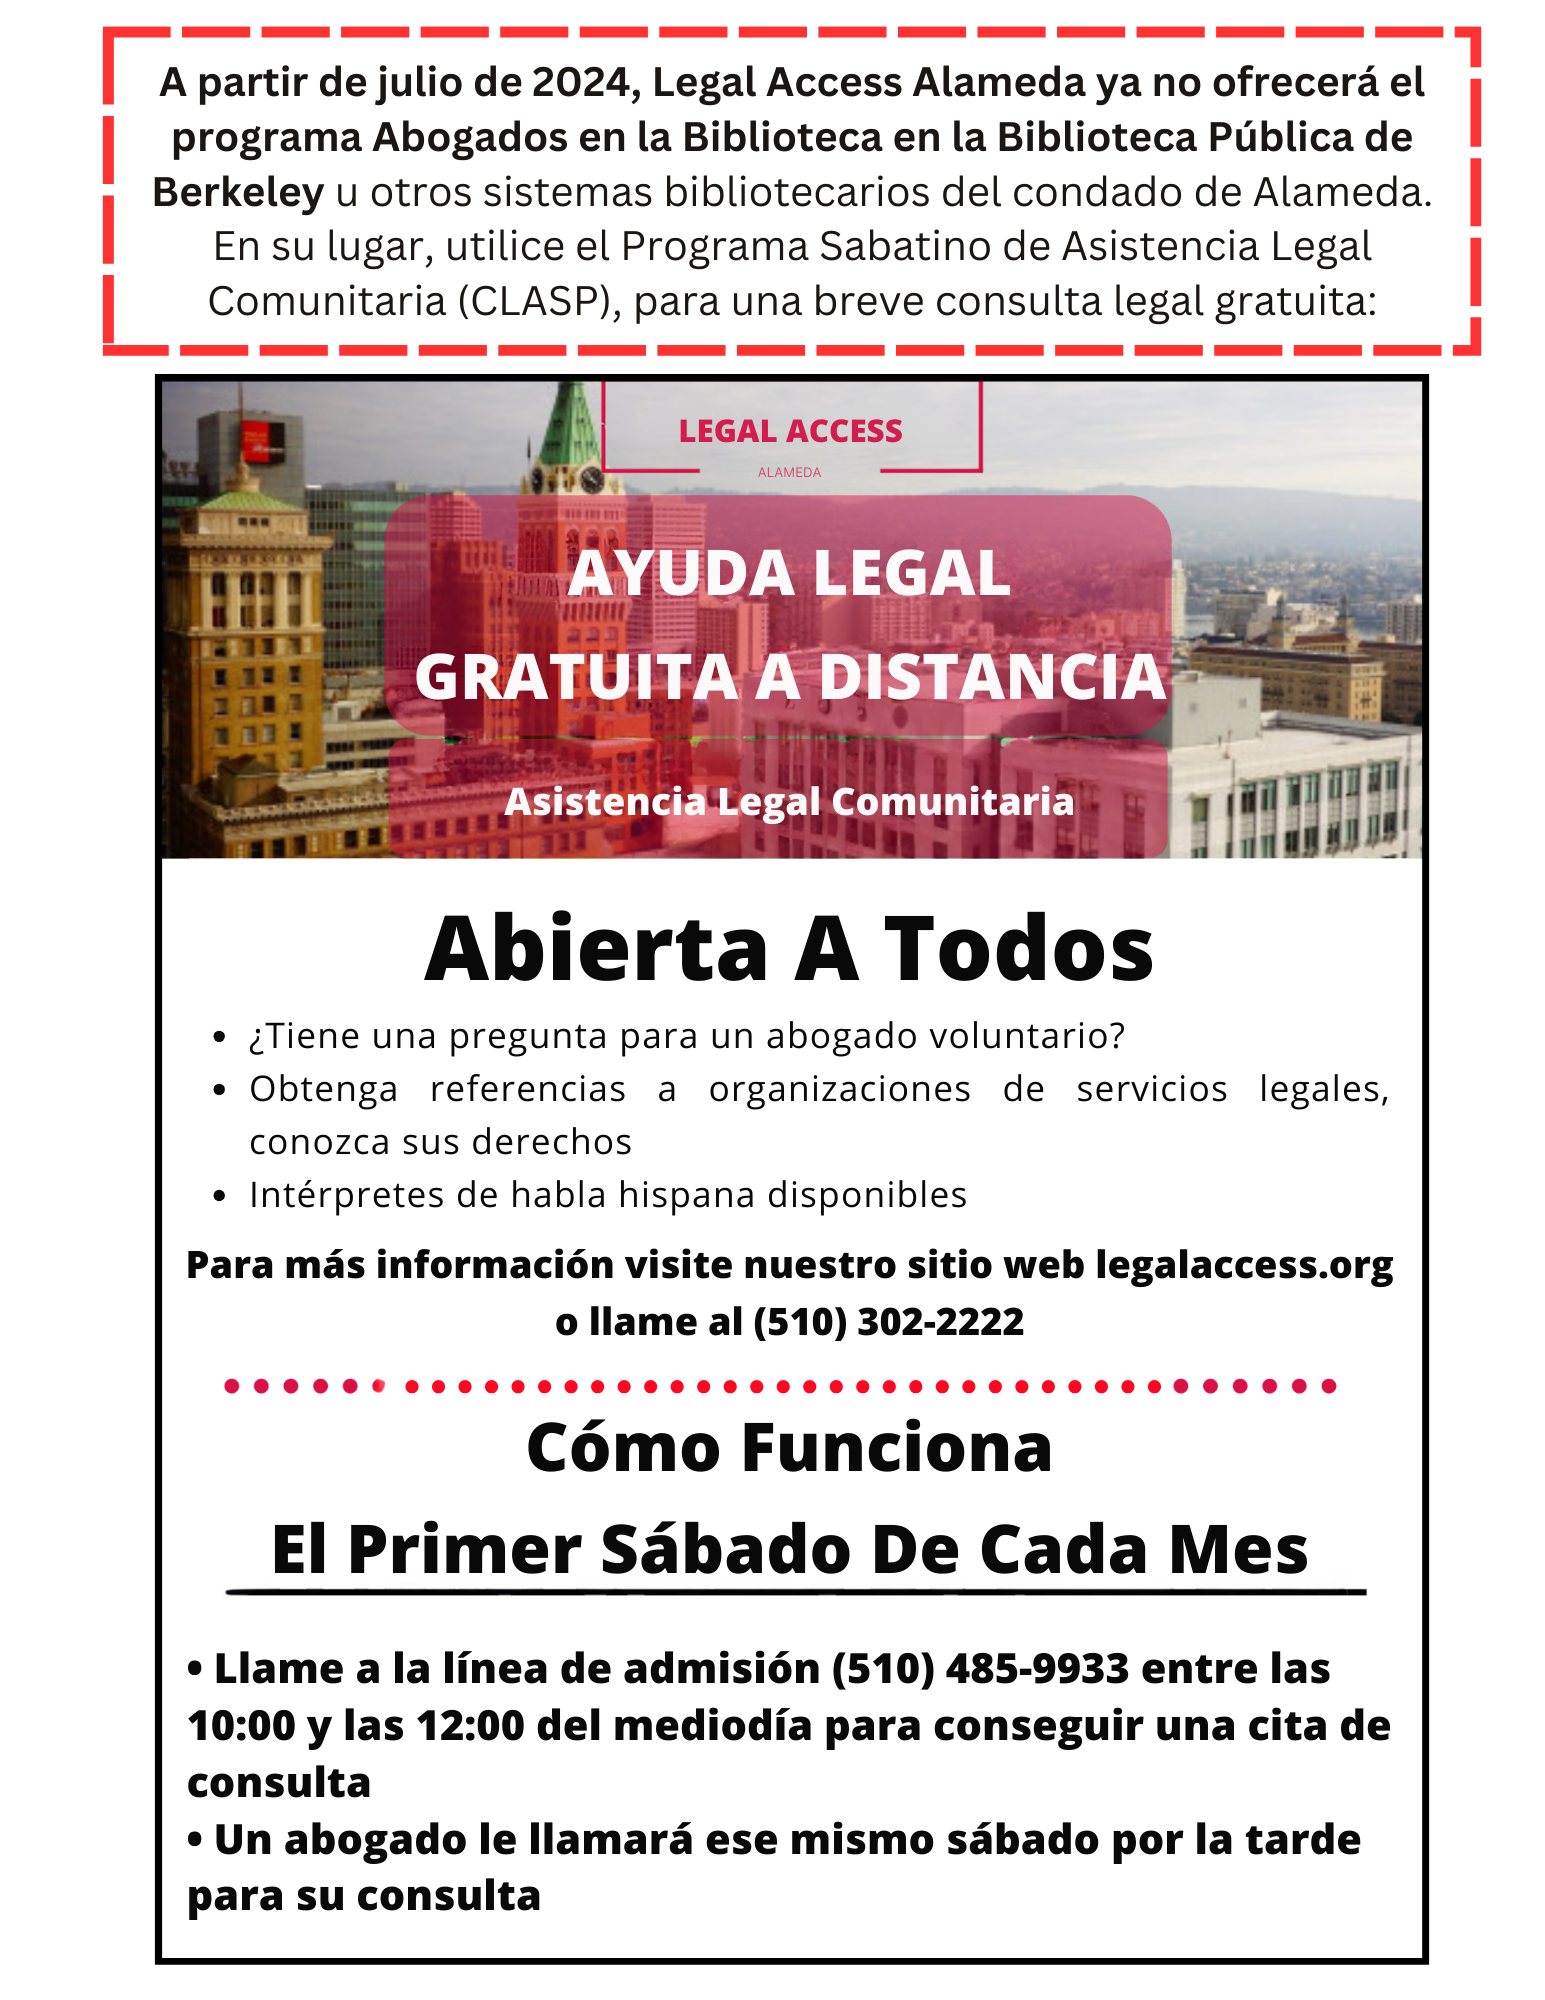 Community Legal Appointment Saturday Program flyer in Spanish